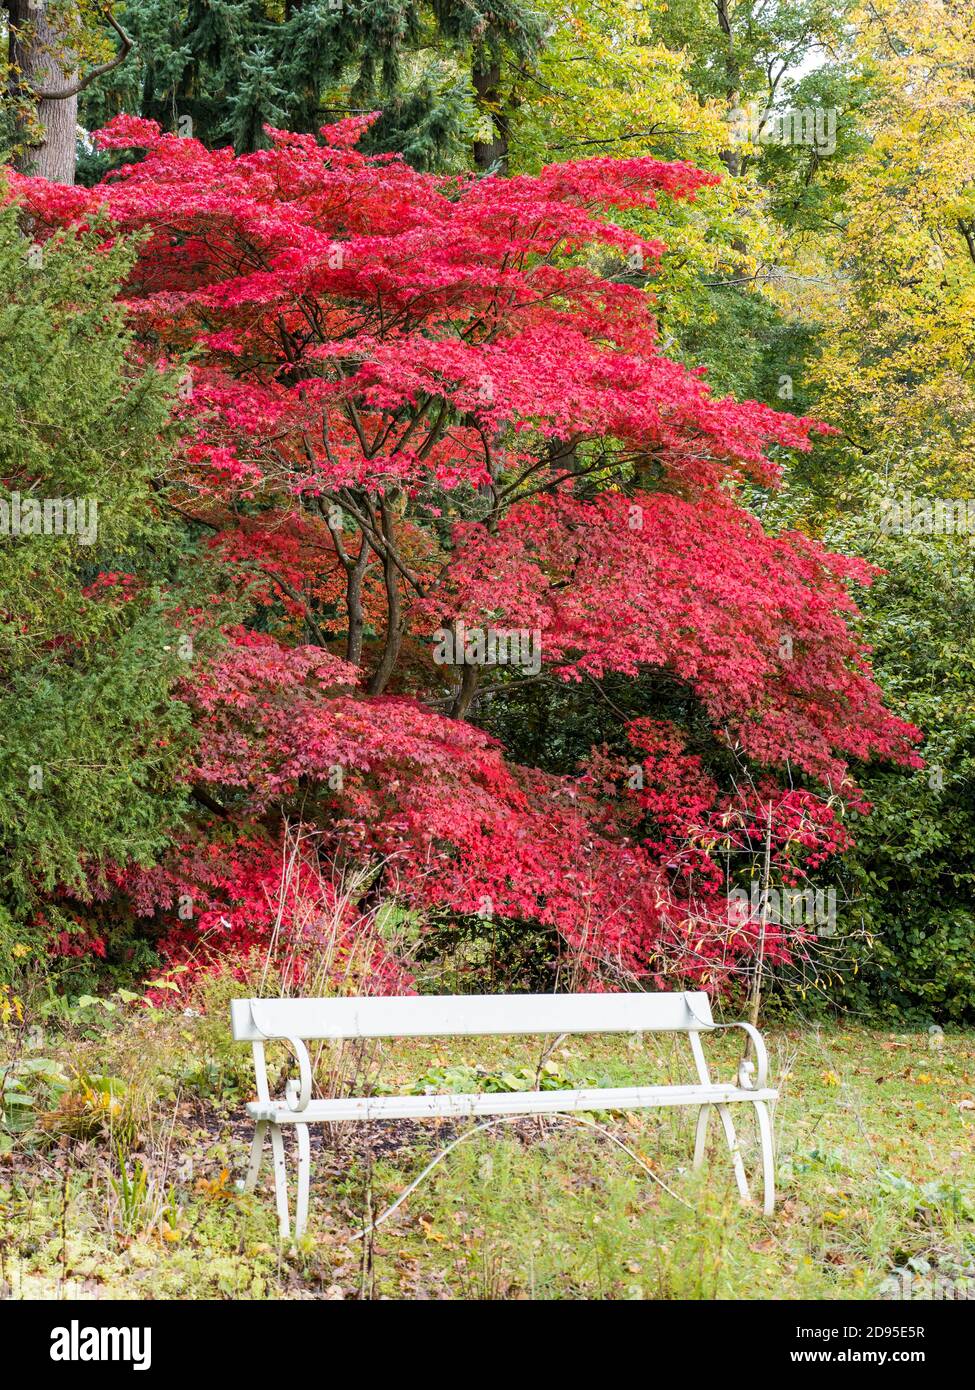 Red Tree and White Garden Chair, Englefield House Gardens, Englefield, Berkshire, Inghilterra, Regno Unito, GB. Foto Stock